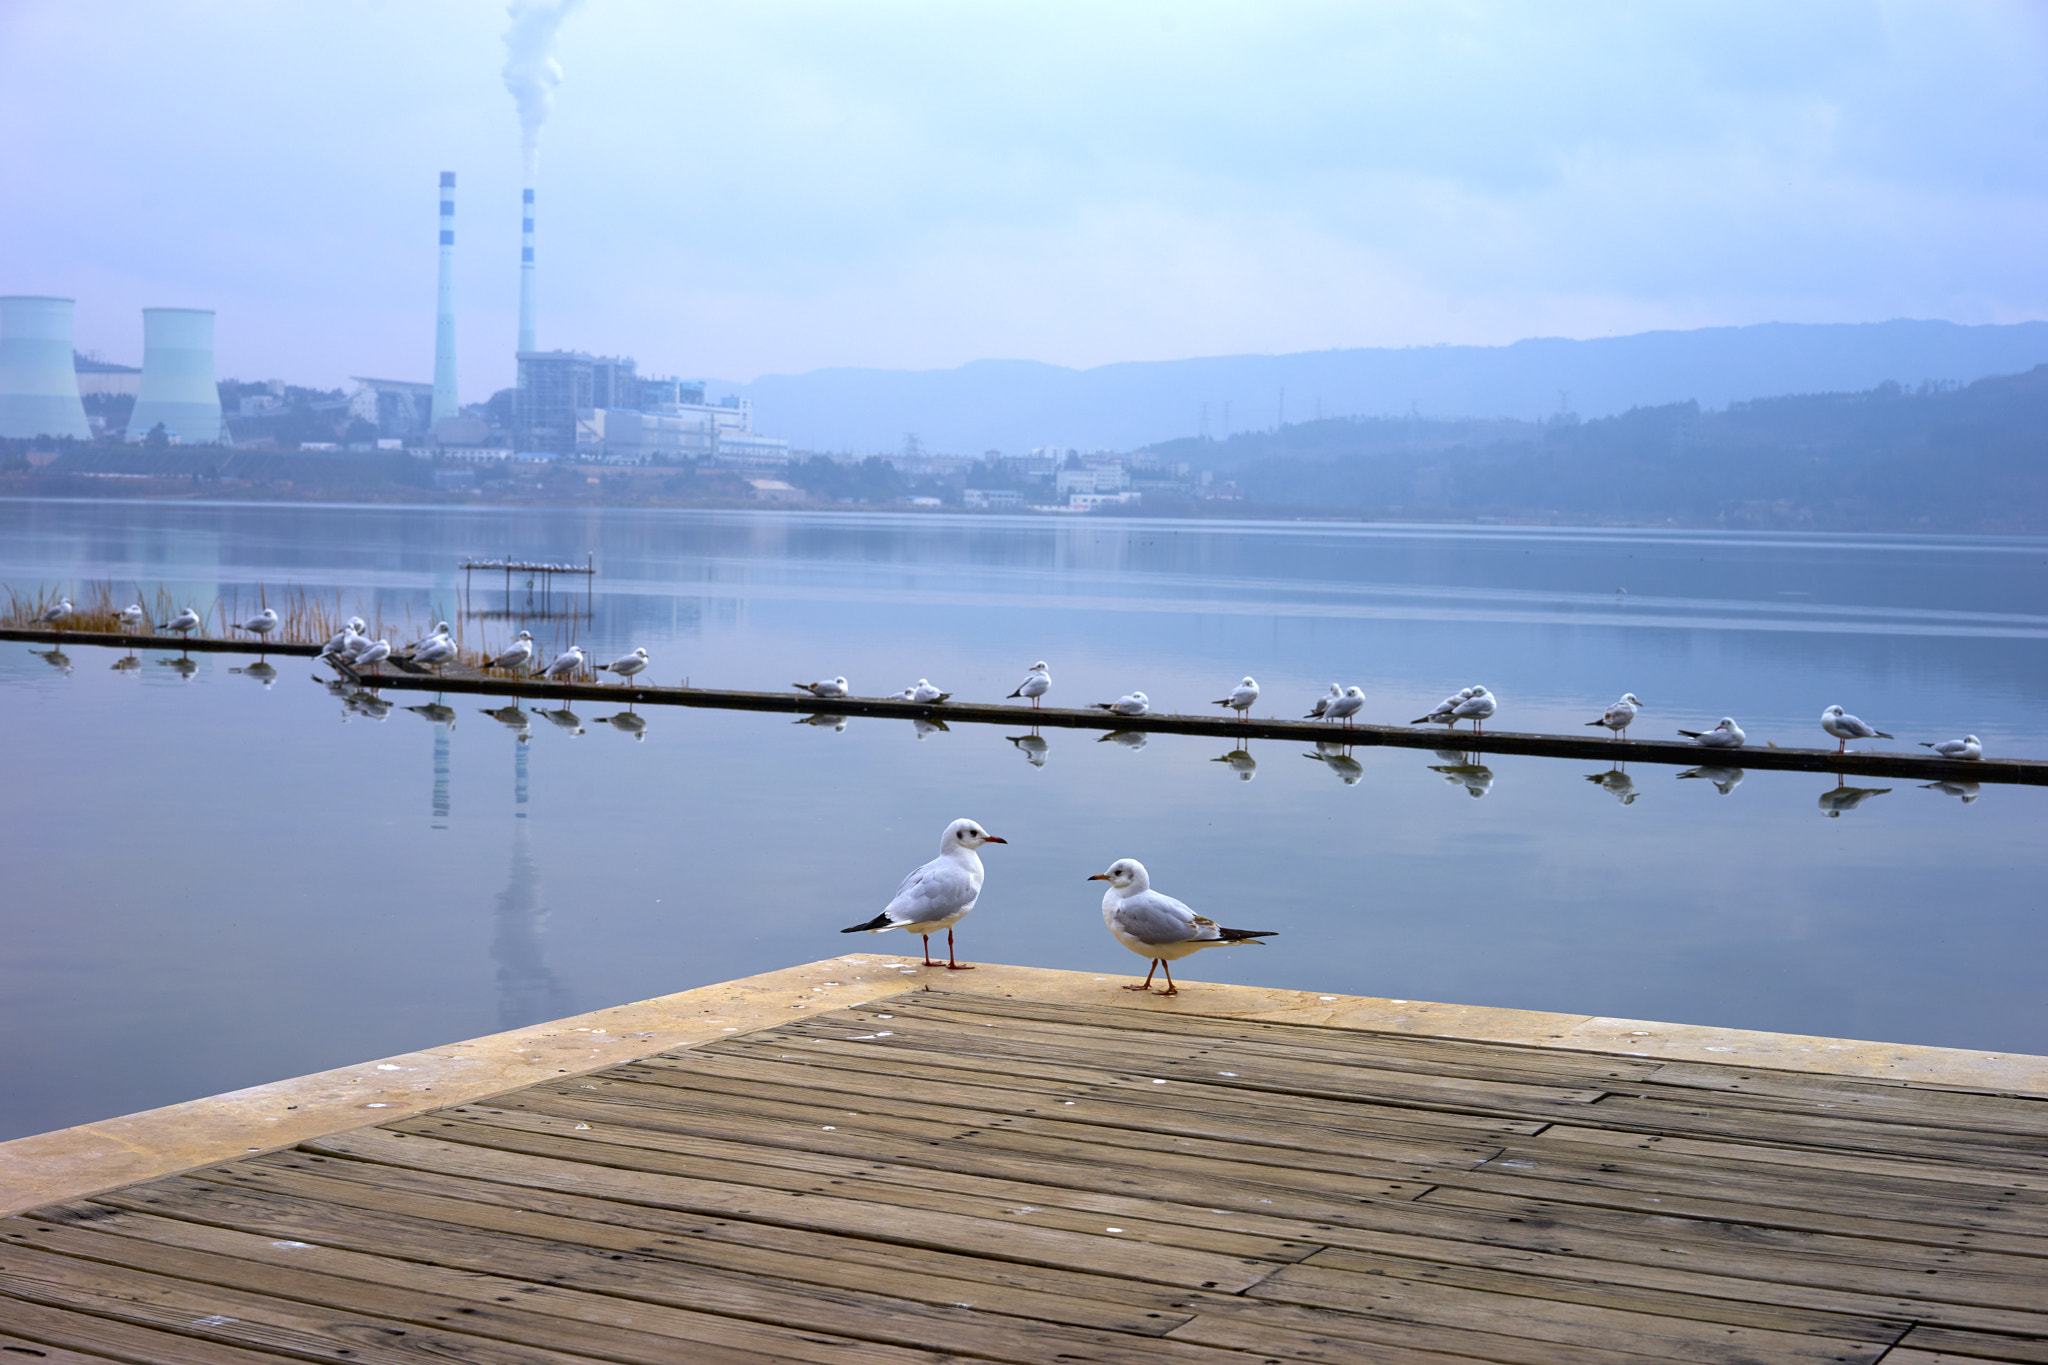 Sony a7 II + Sony Sonnar T* FE 55mm F1.8 ZA sample photo. Seagulls on winter lake near a factory photography